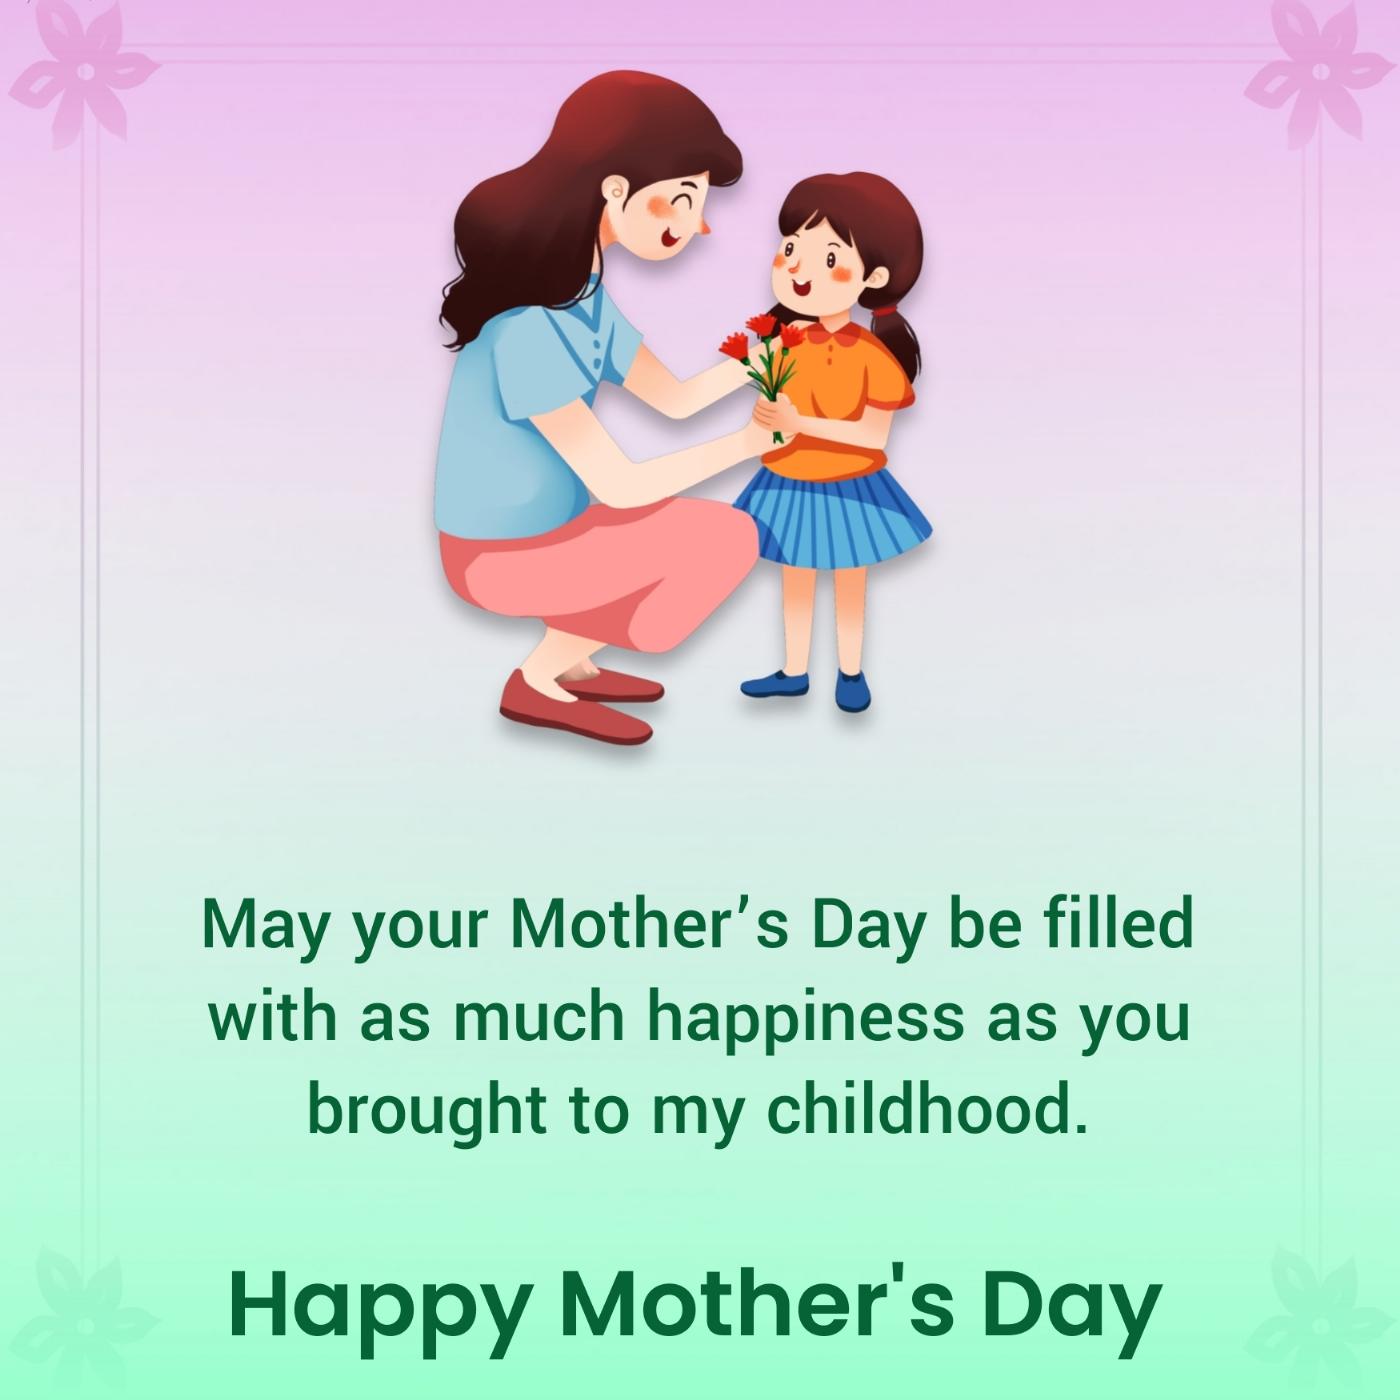 May your Mothers Day be filled with as much happiness